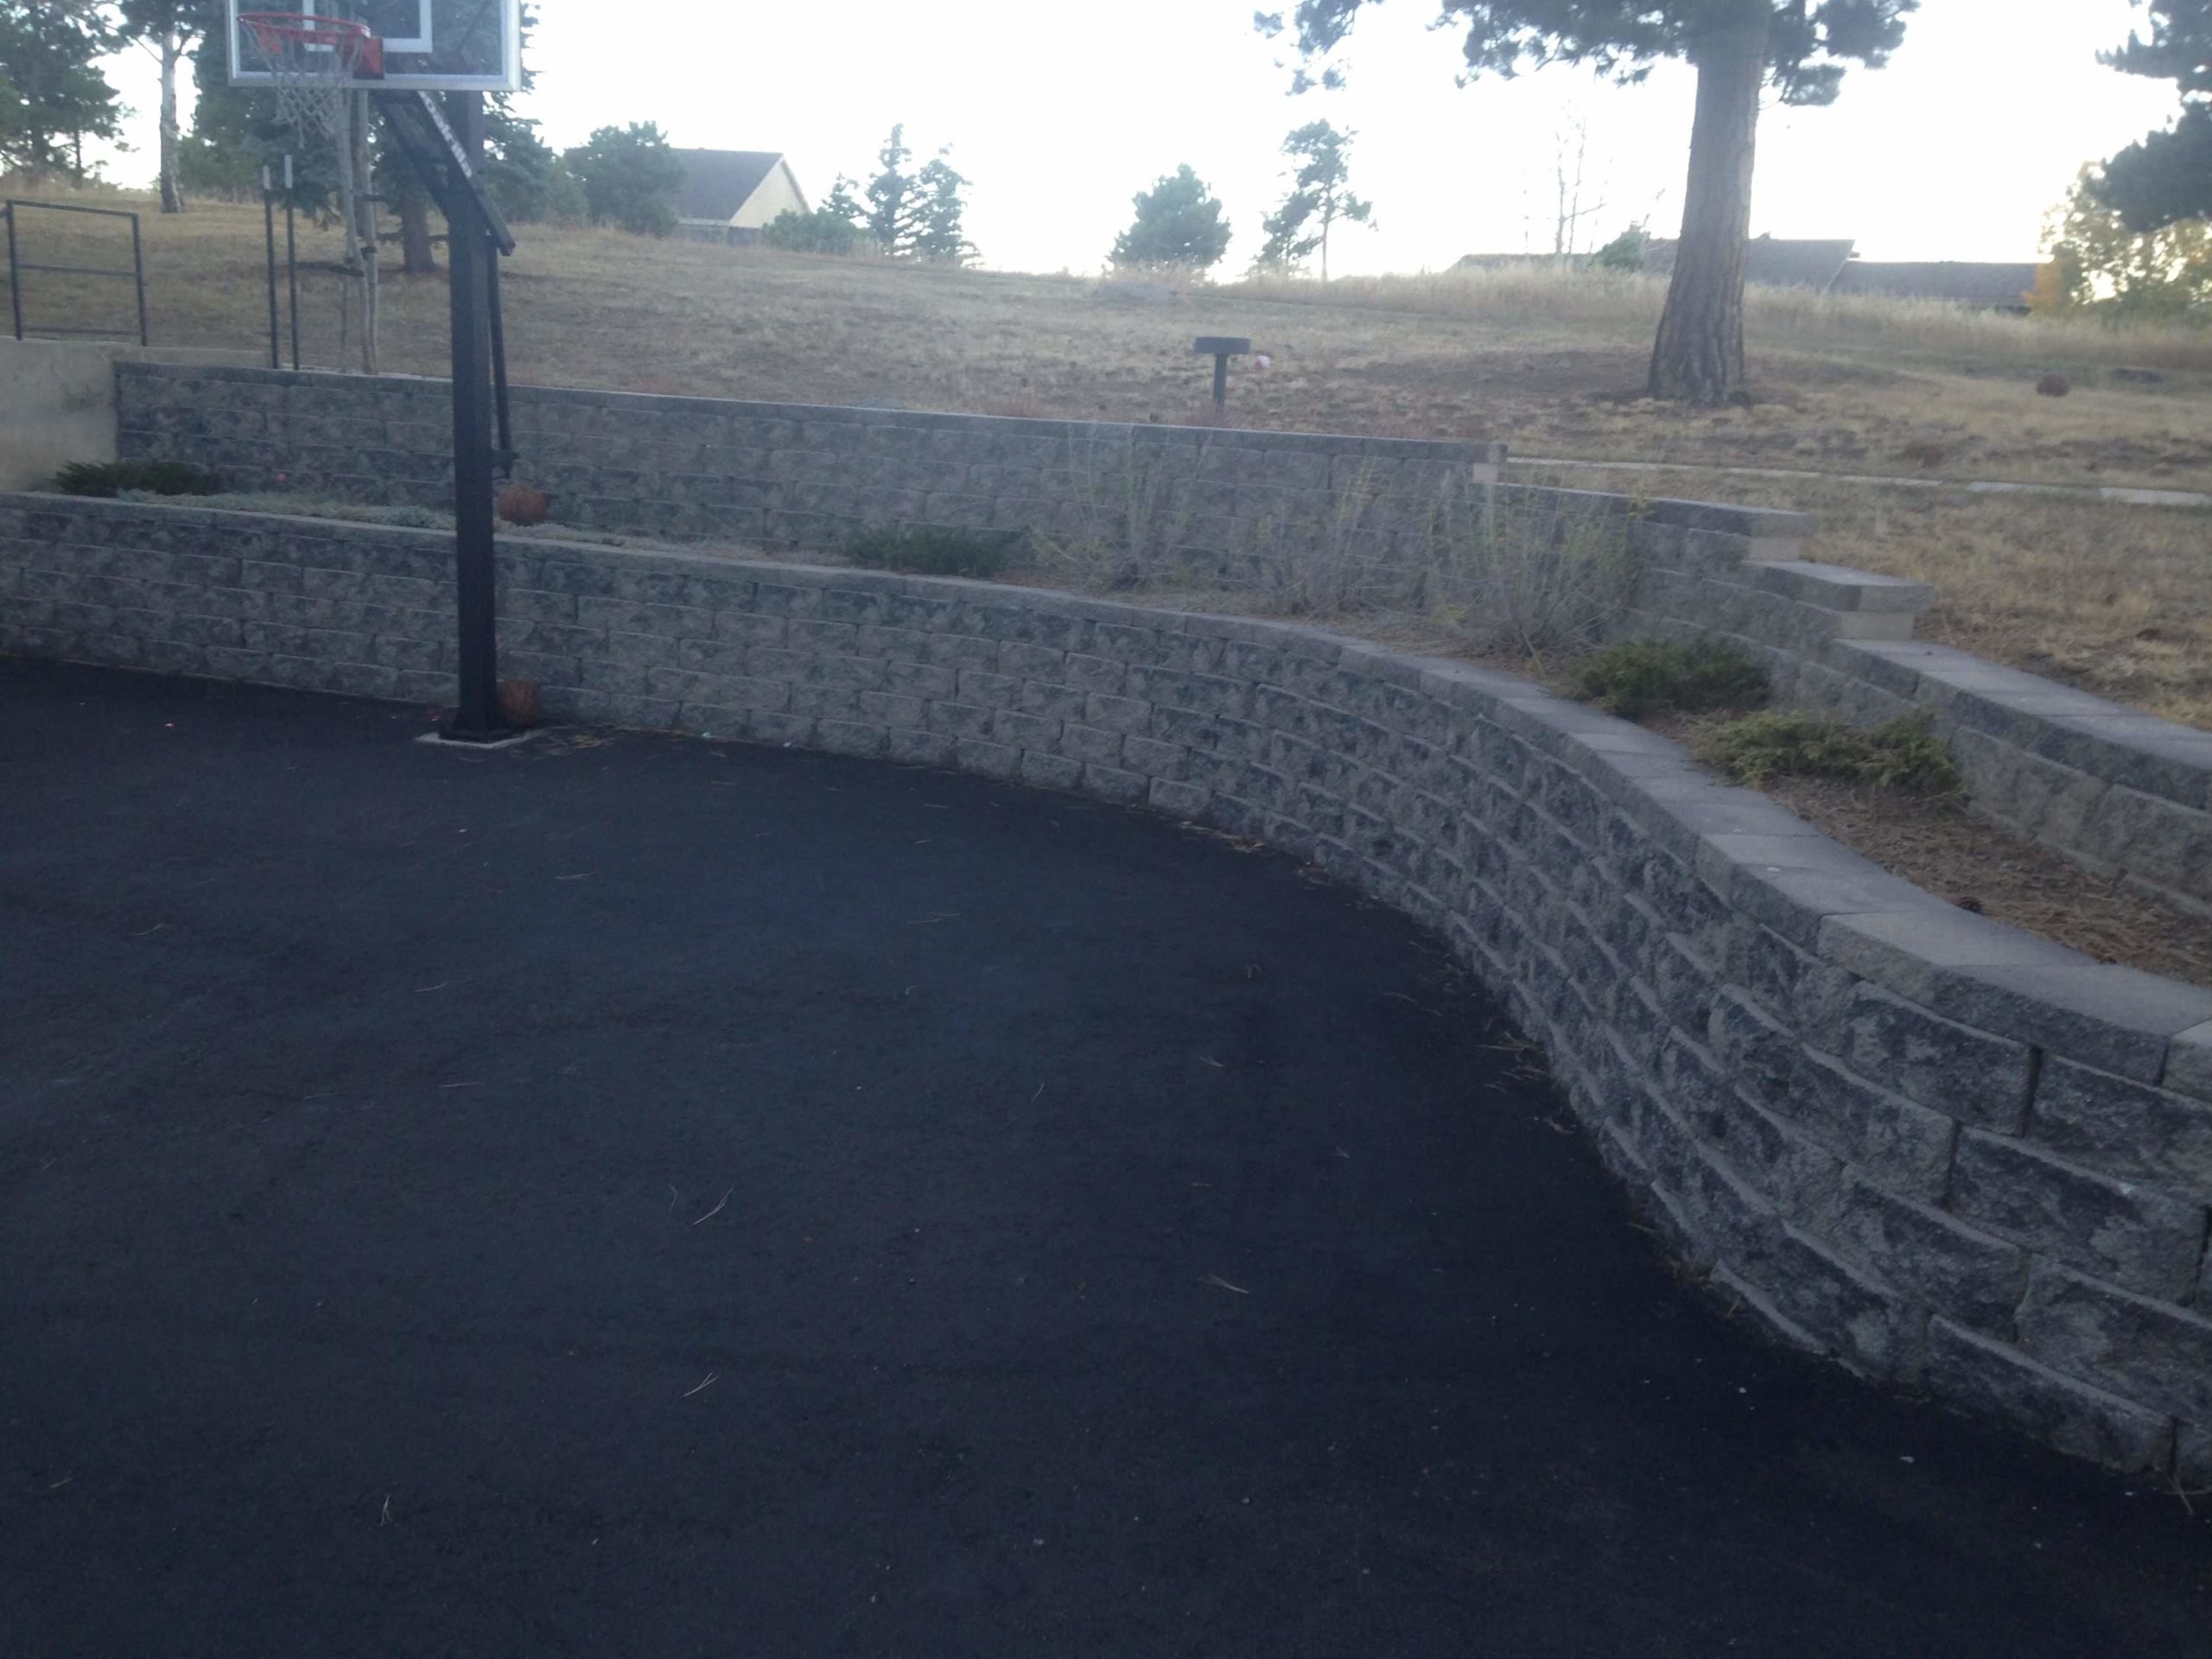 Double-terraced retaining wall next to paved basketball court